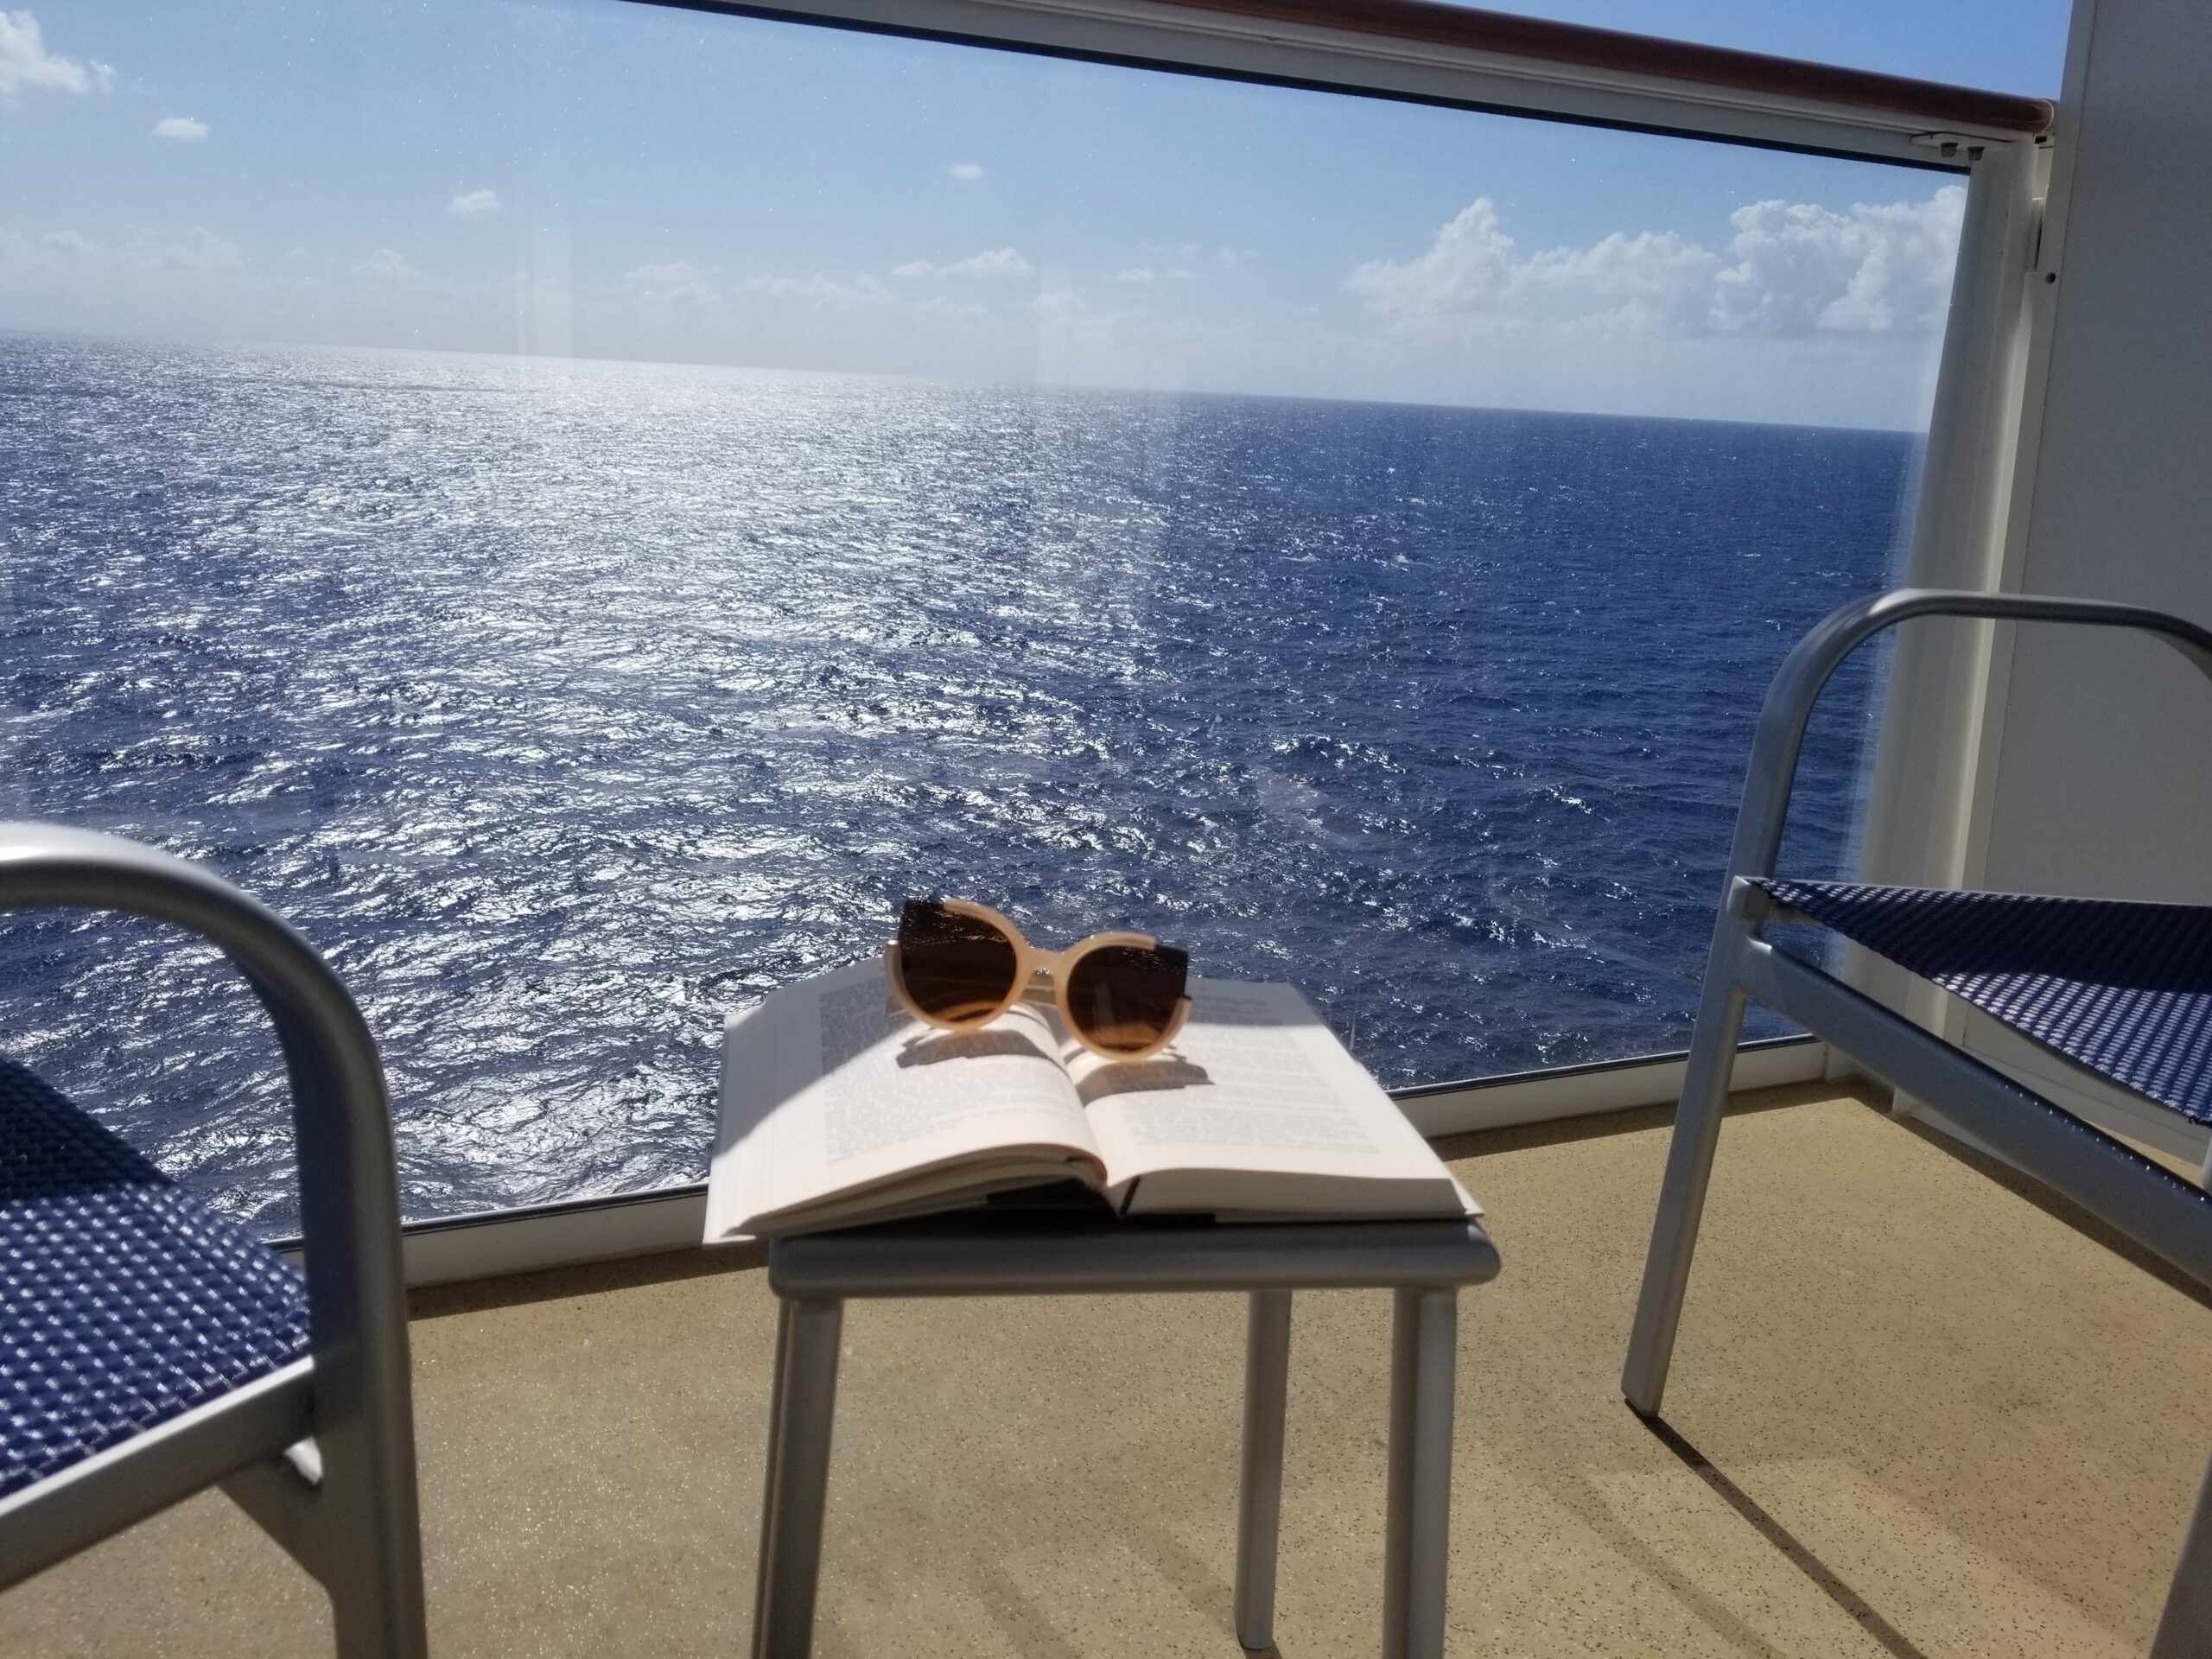 Reasons to Choose a Balcony Stateroom on a Cruise